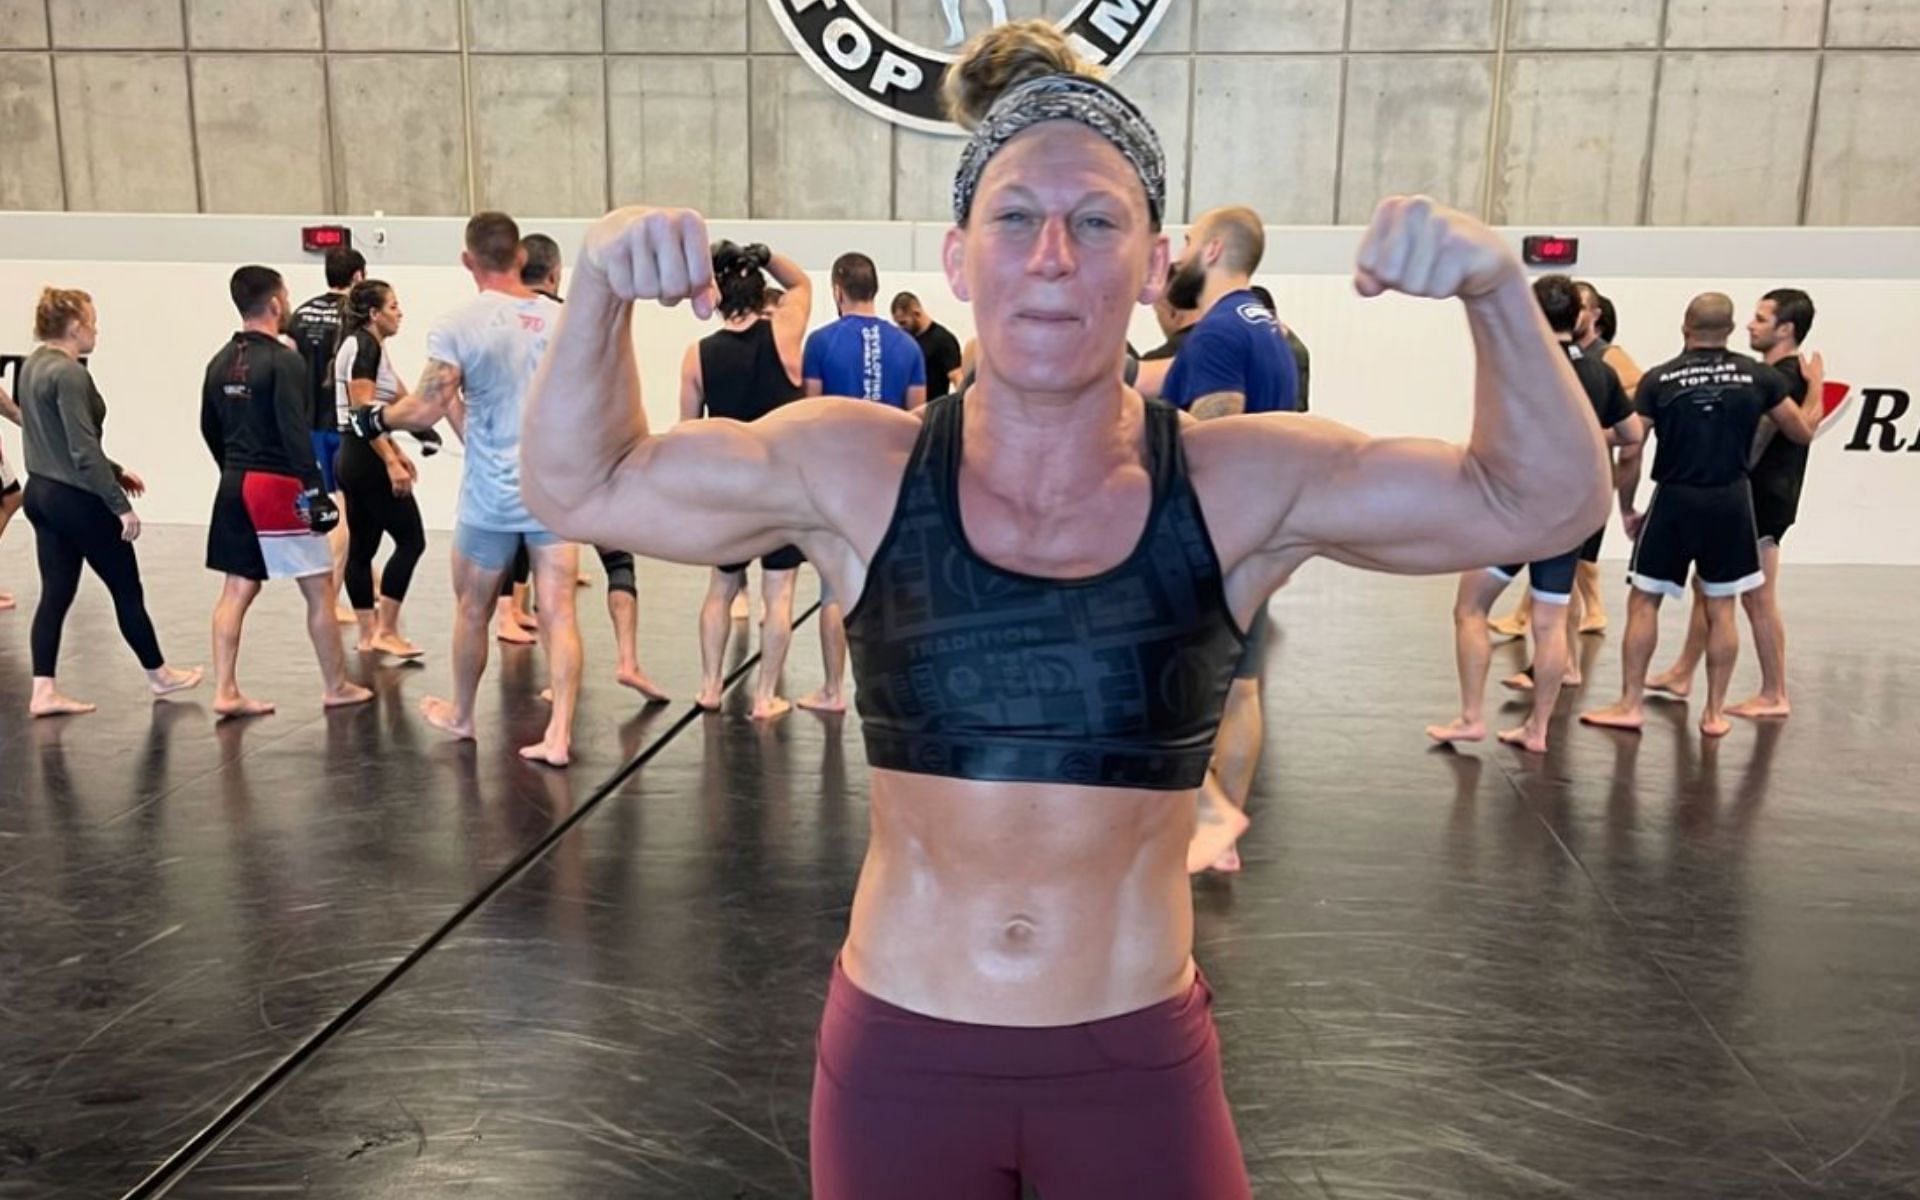 Kayla Harrison (pictured) during a training session at American Top Team [Photo Courtesy @kaylaharrisonofficial on Instagram]